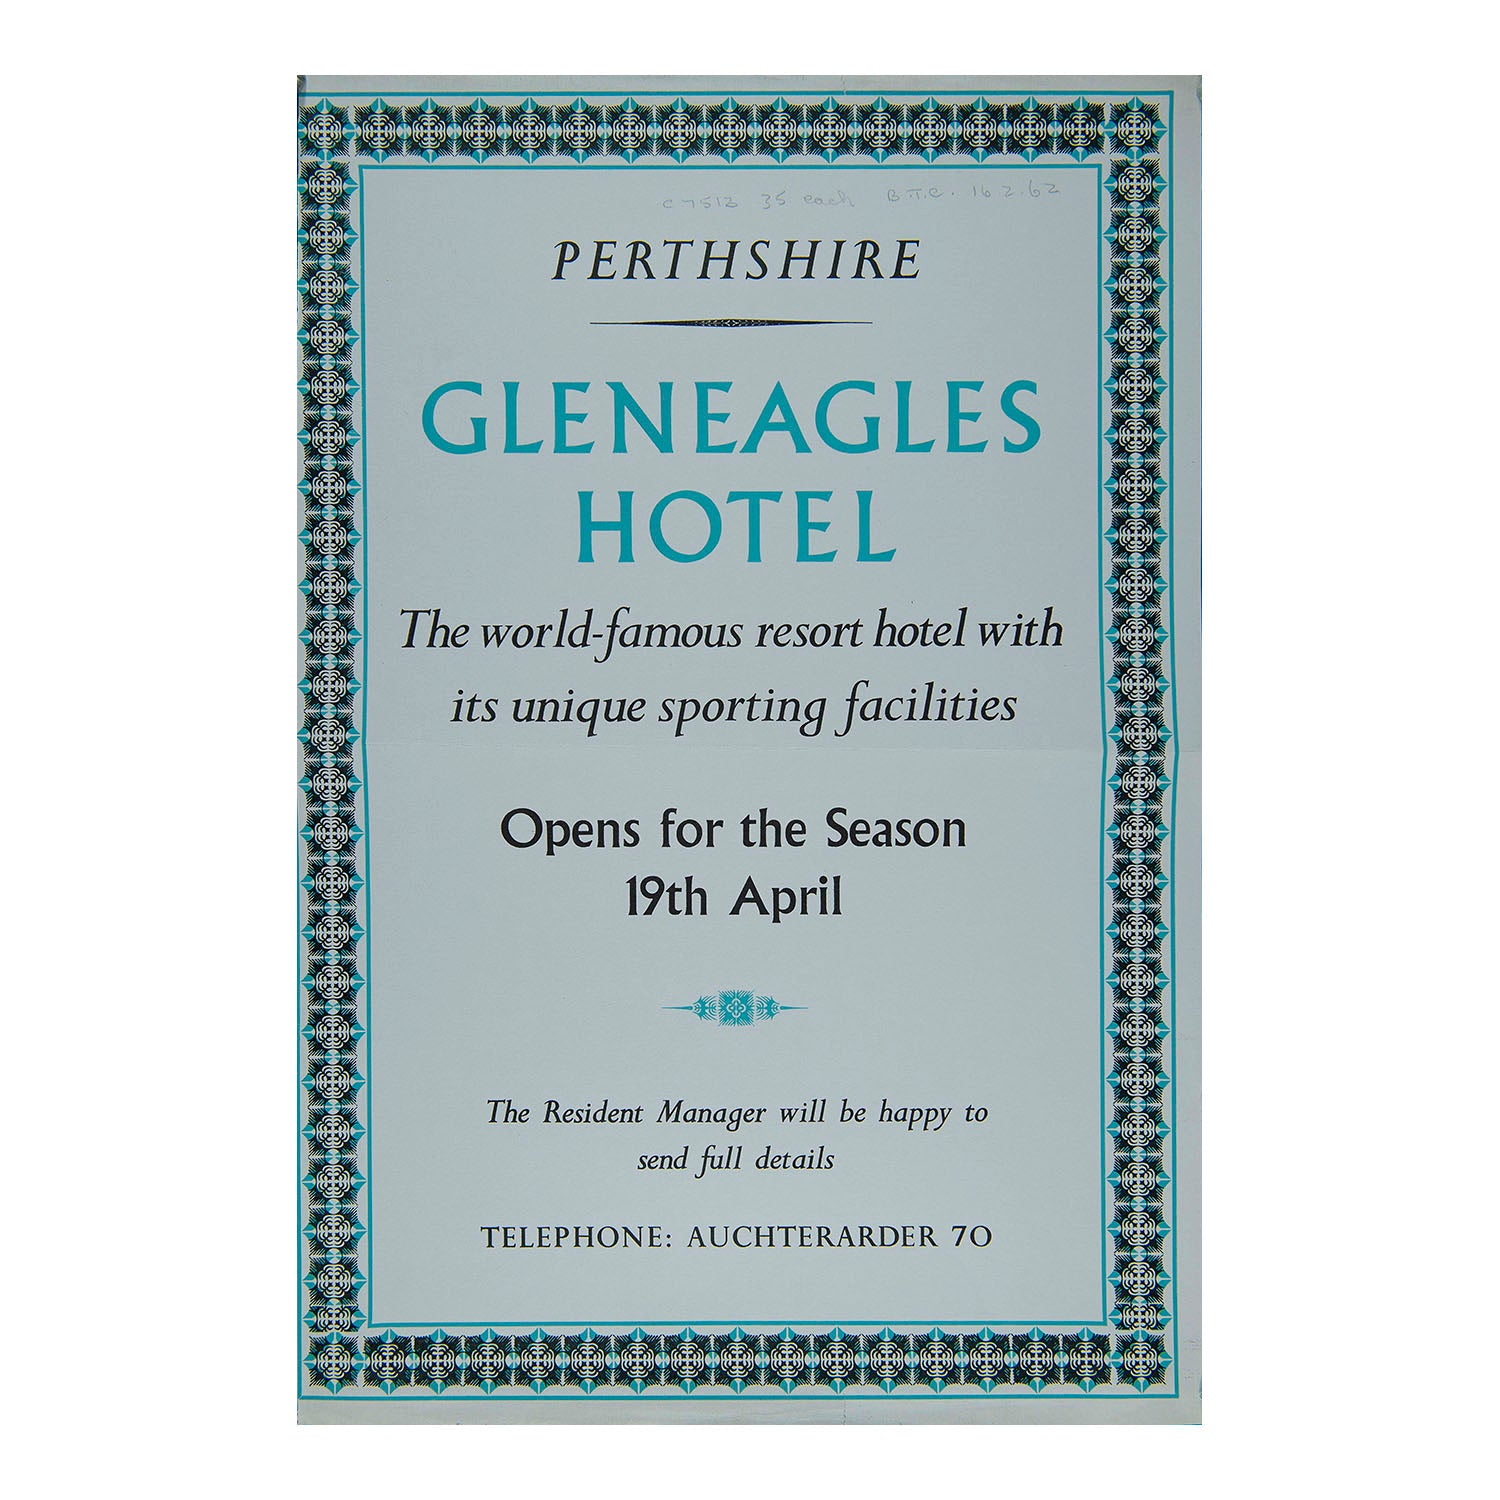 poster for the famous Gleneagles Hotel and golf resort, near Auchterarder, Scotland, 1962. The poster, with decorative border designed in-house at the Curwen Press, promotes “The world-famous resort hotel with its unique sporting facilities